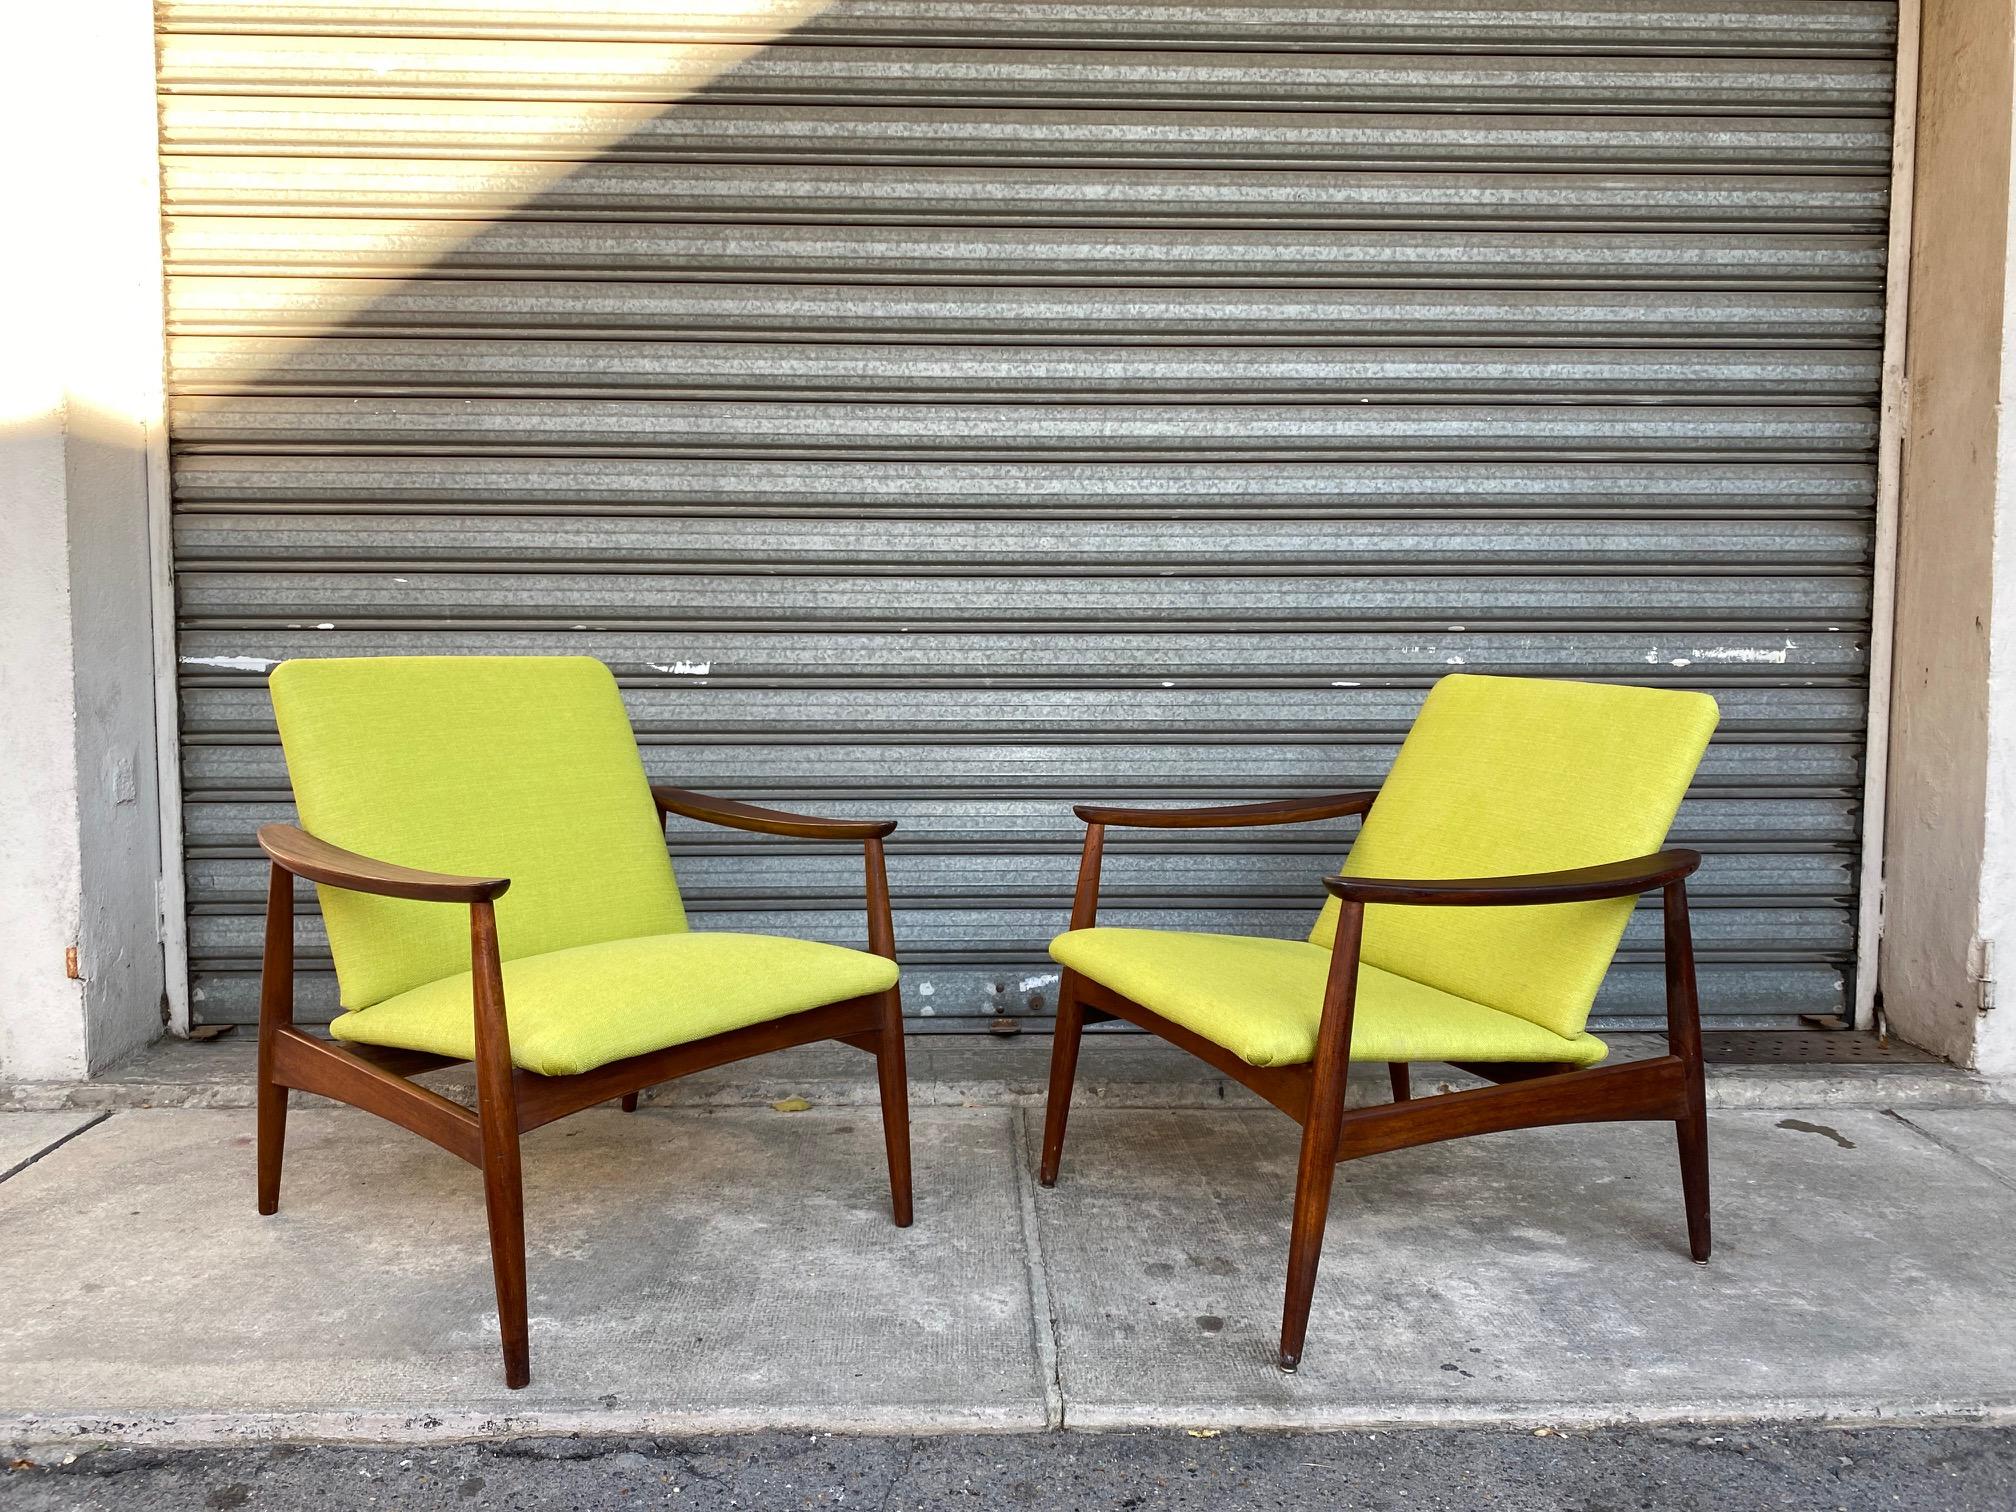 Pair of Portuguese armchairs, in the style of Altamira editions, 1960s.